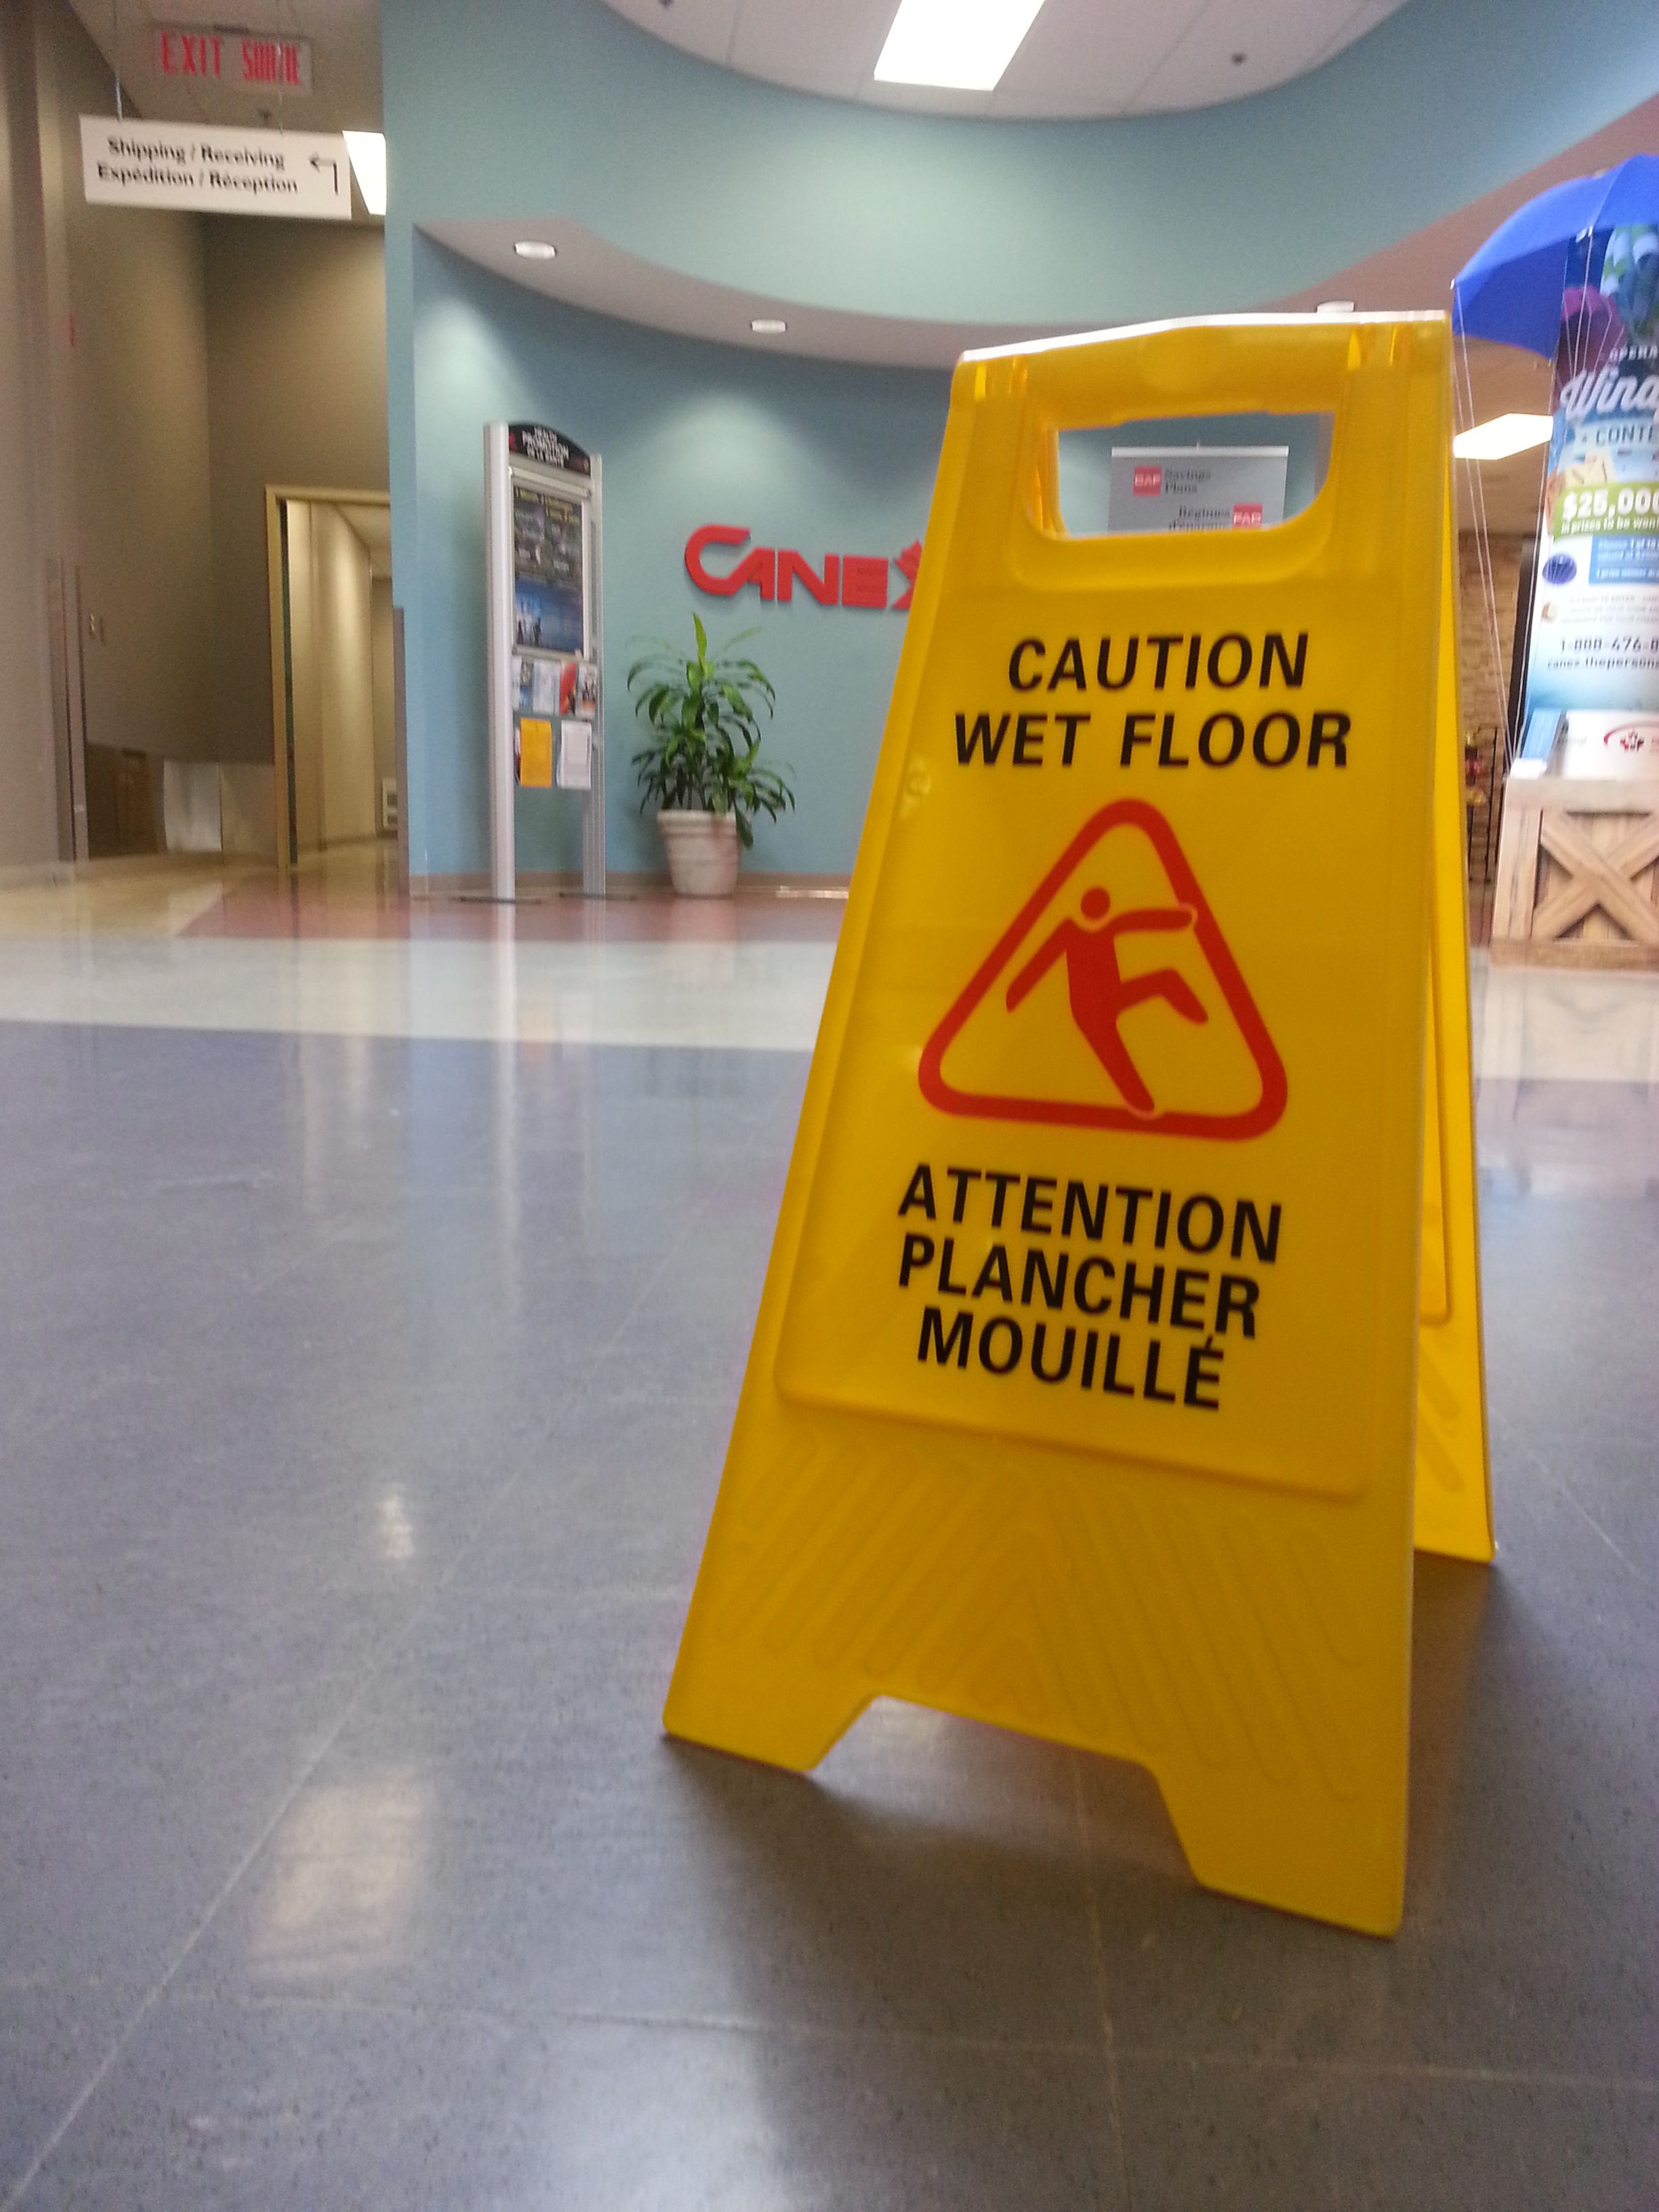 What are the Common Causes of Slip and Fall Accident?